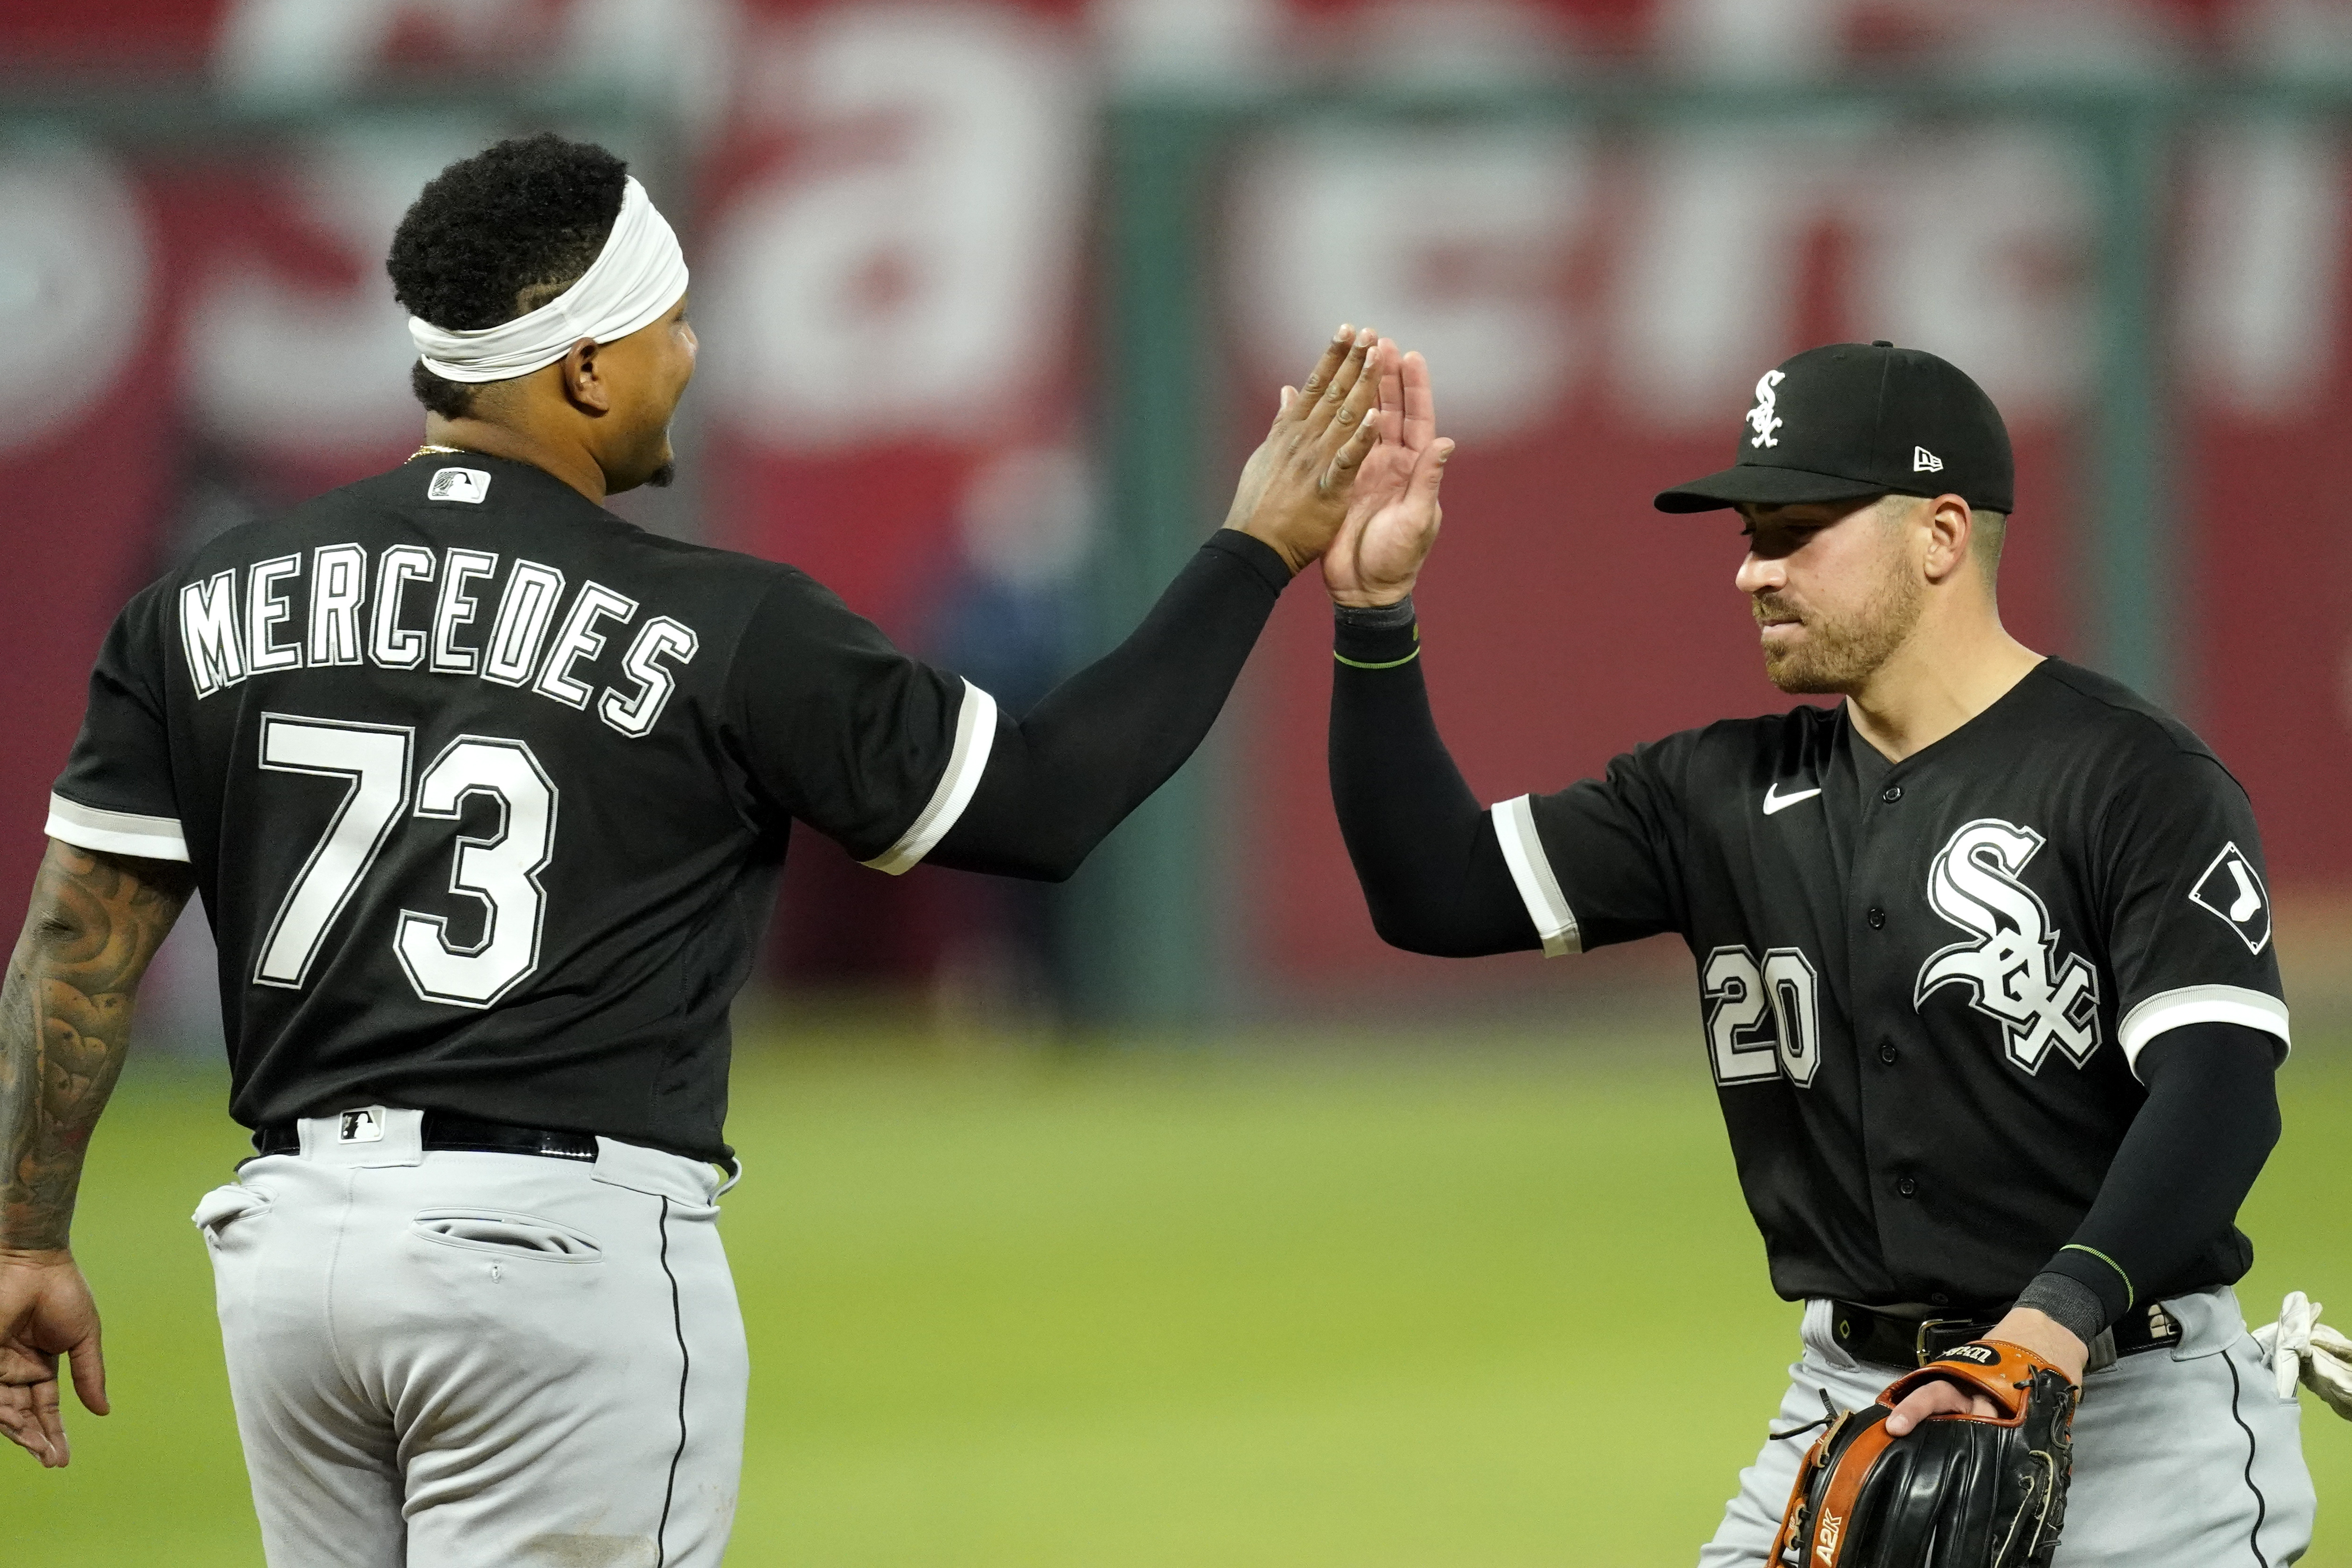 White Sox jump on sagging Royals with 8 runs in 1st, win 9-1